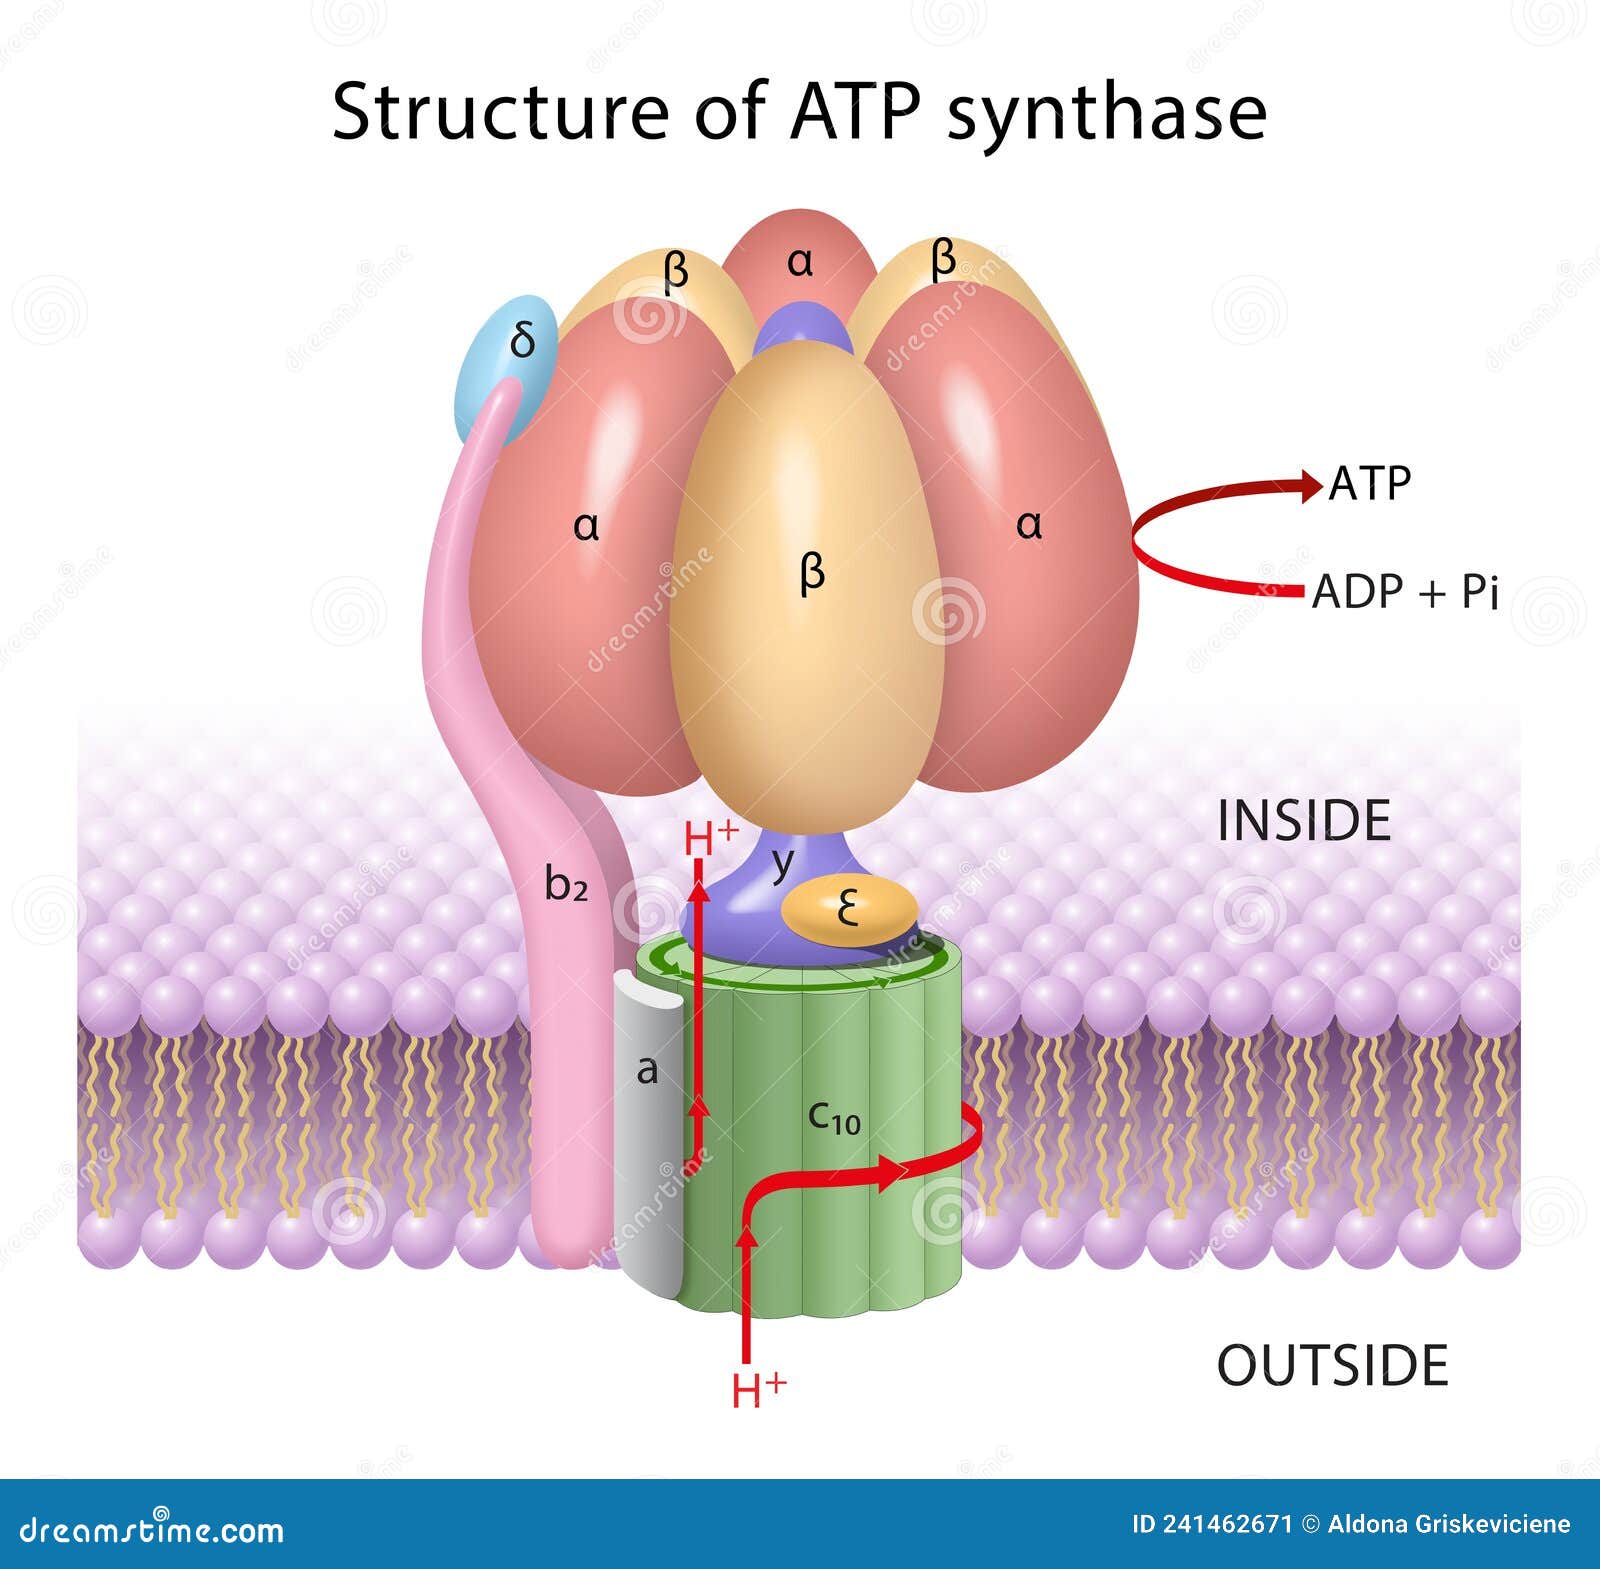 the components of atp synthase, a rotary motor